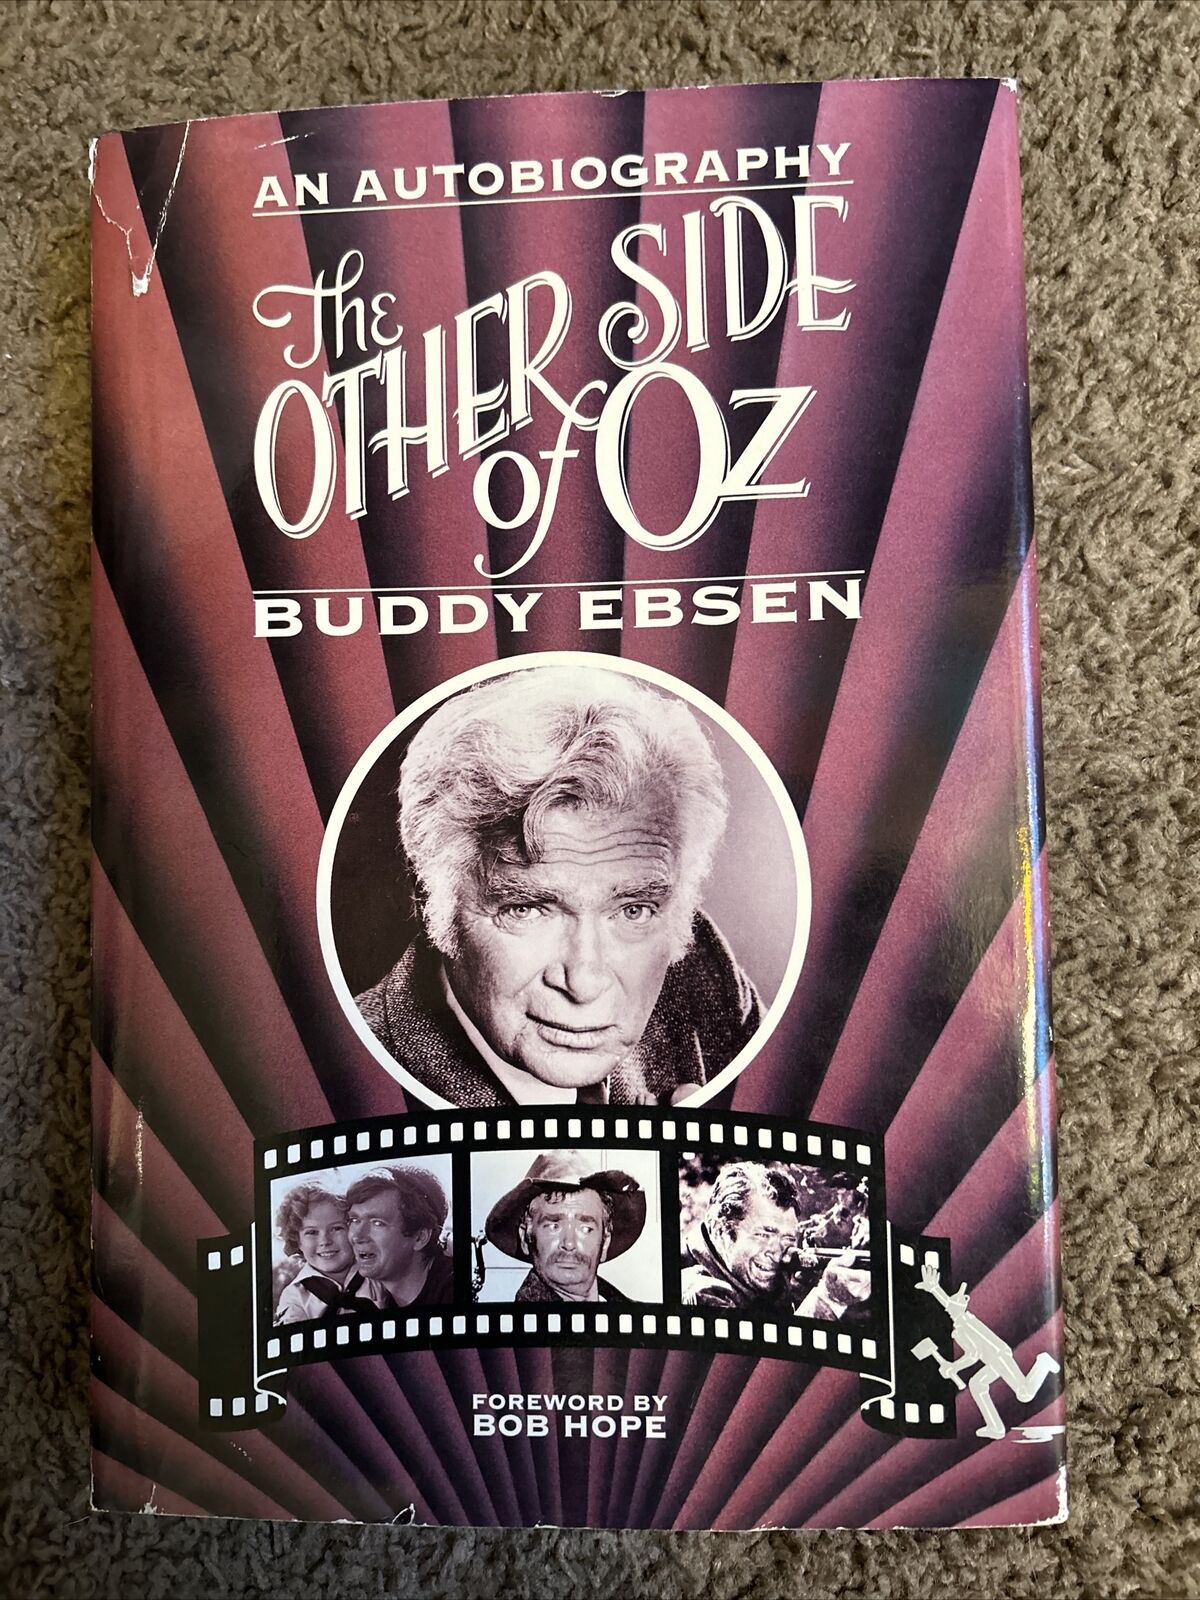 The Other Side Of Oz Buddy Ebsen Signed Copy